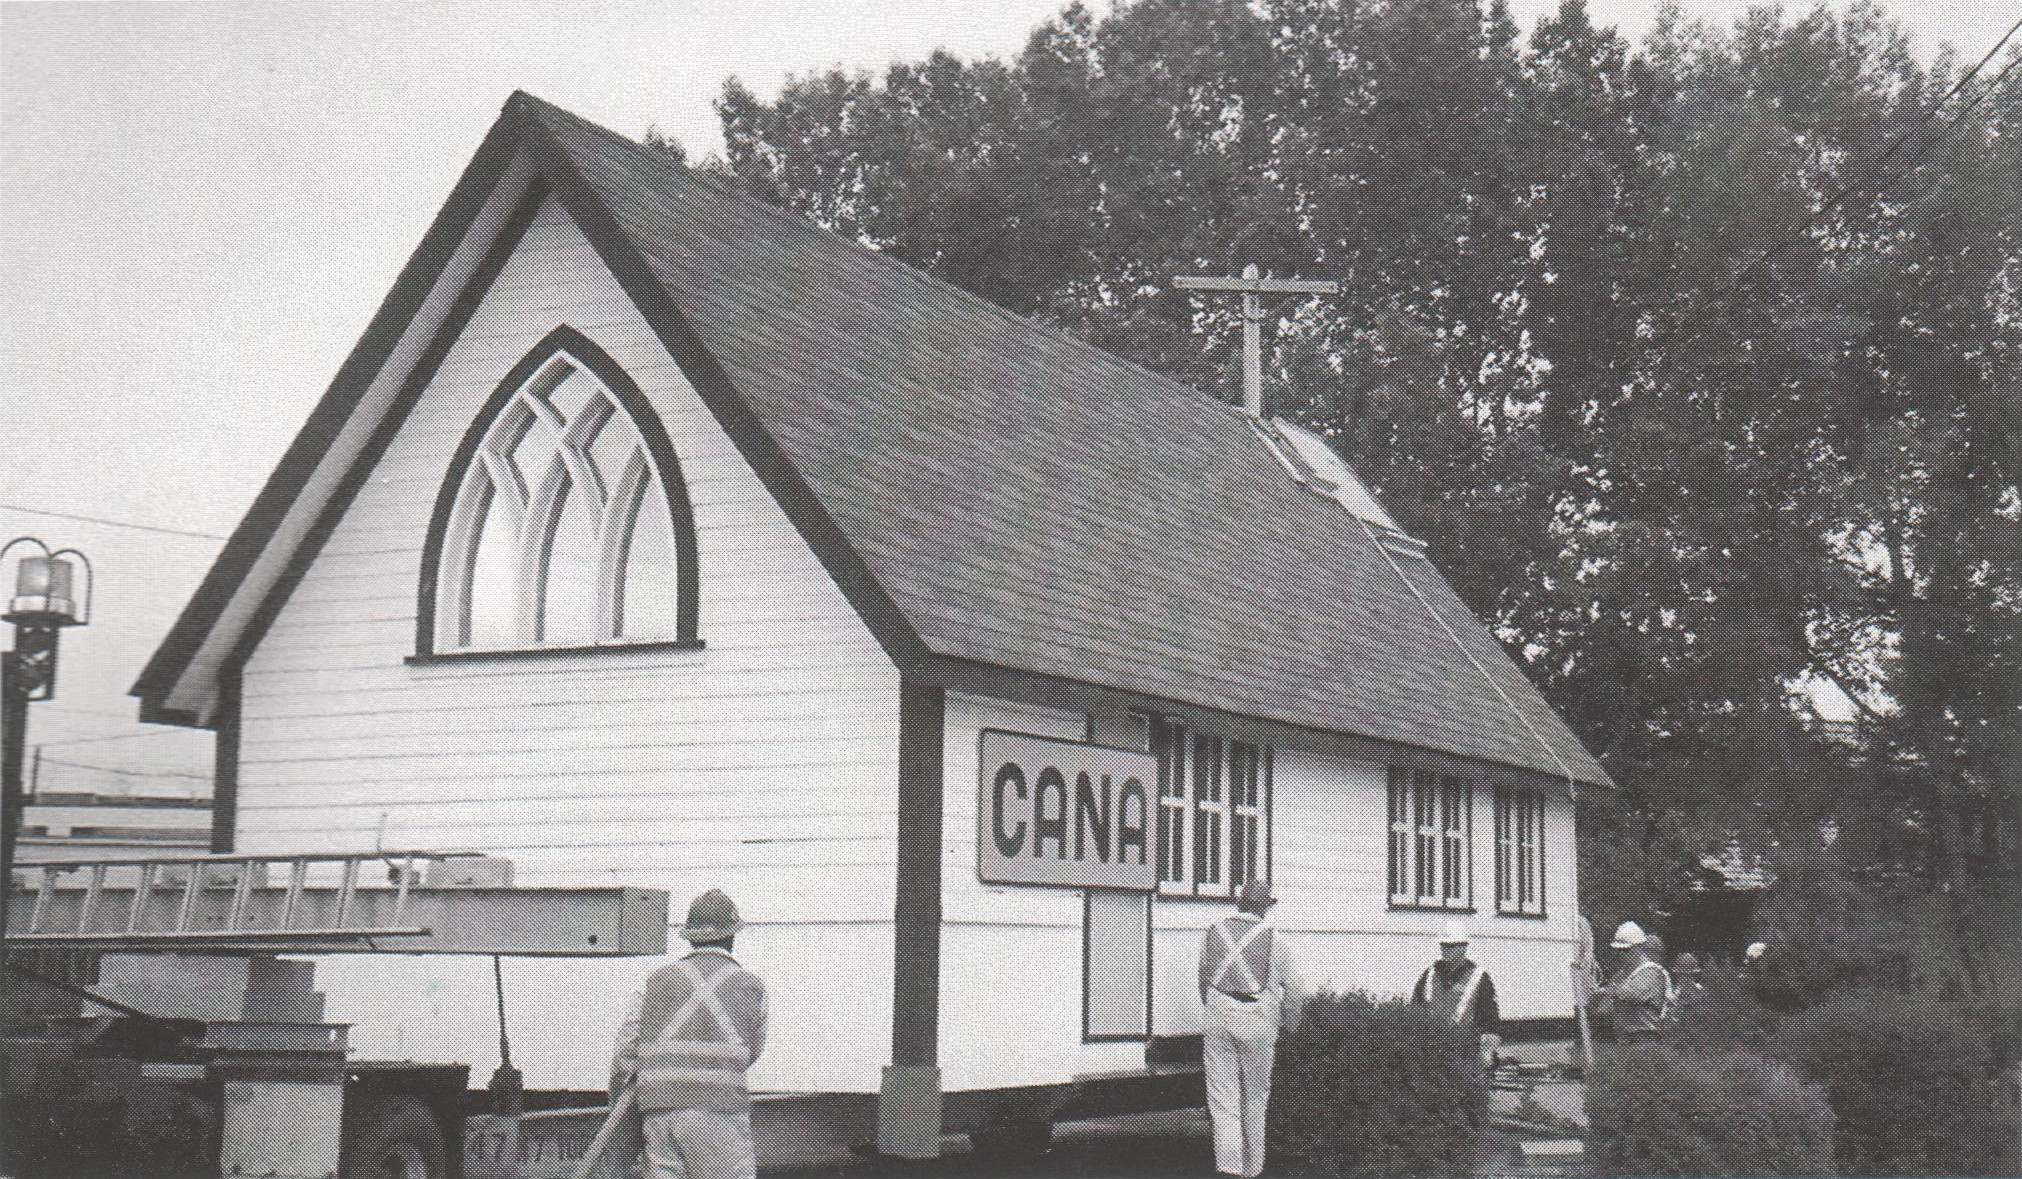 The church on the move again in 2004